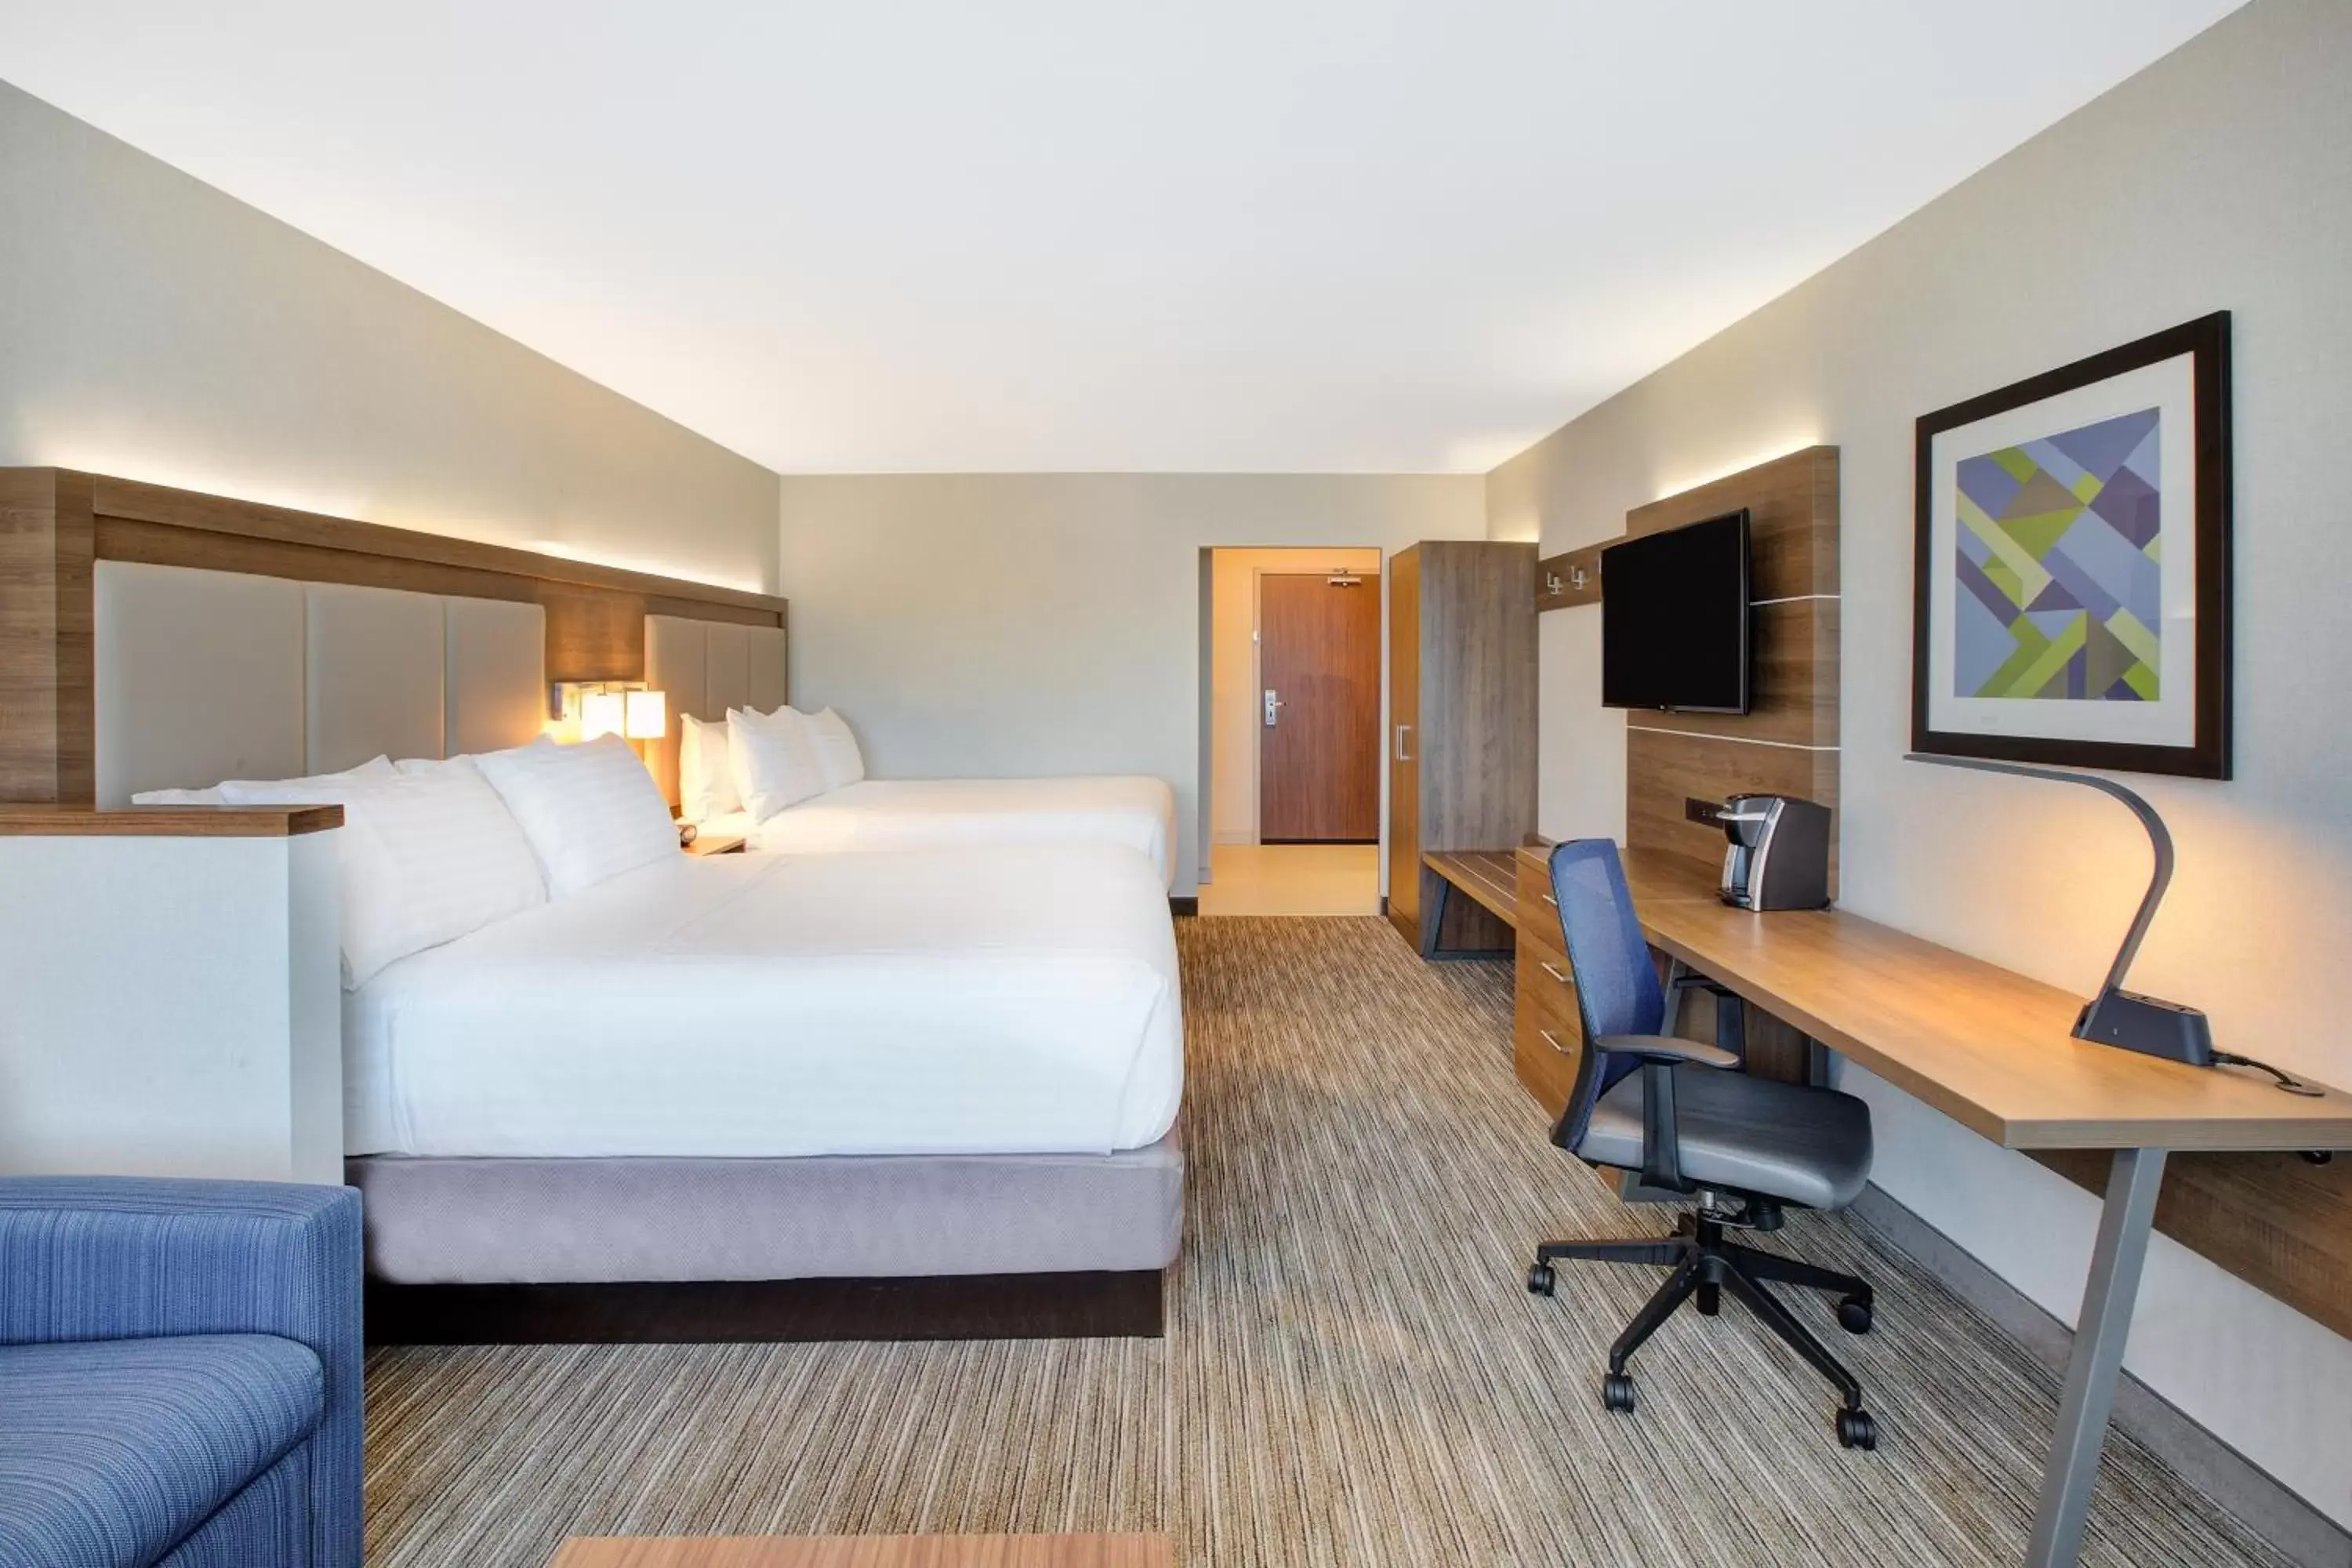 Holiday Inn Express & Suites New Castle, an IHG Hotel